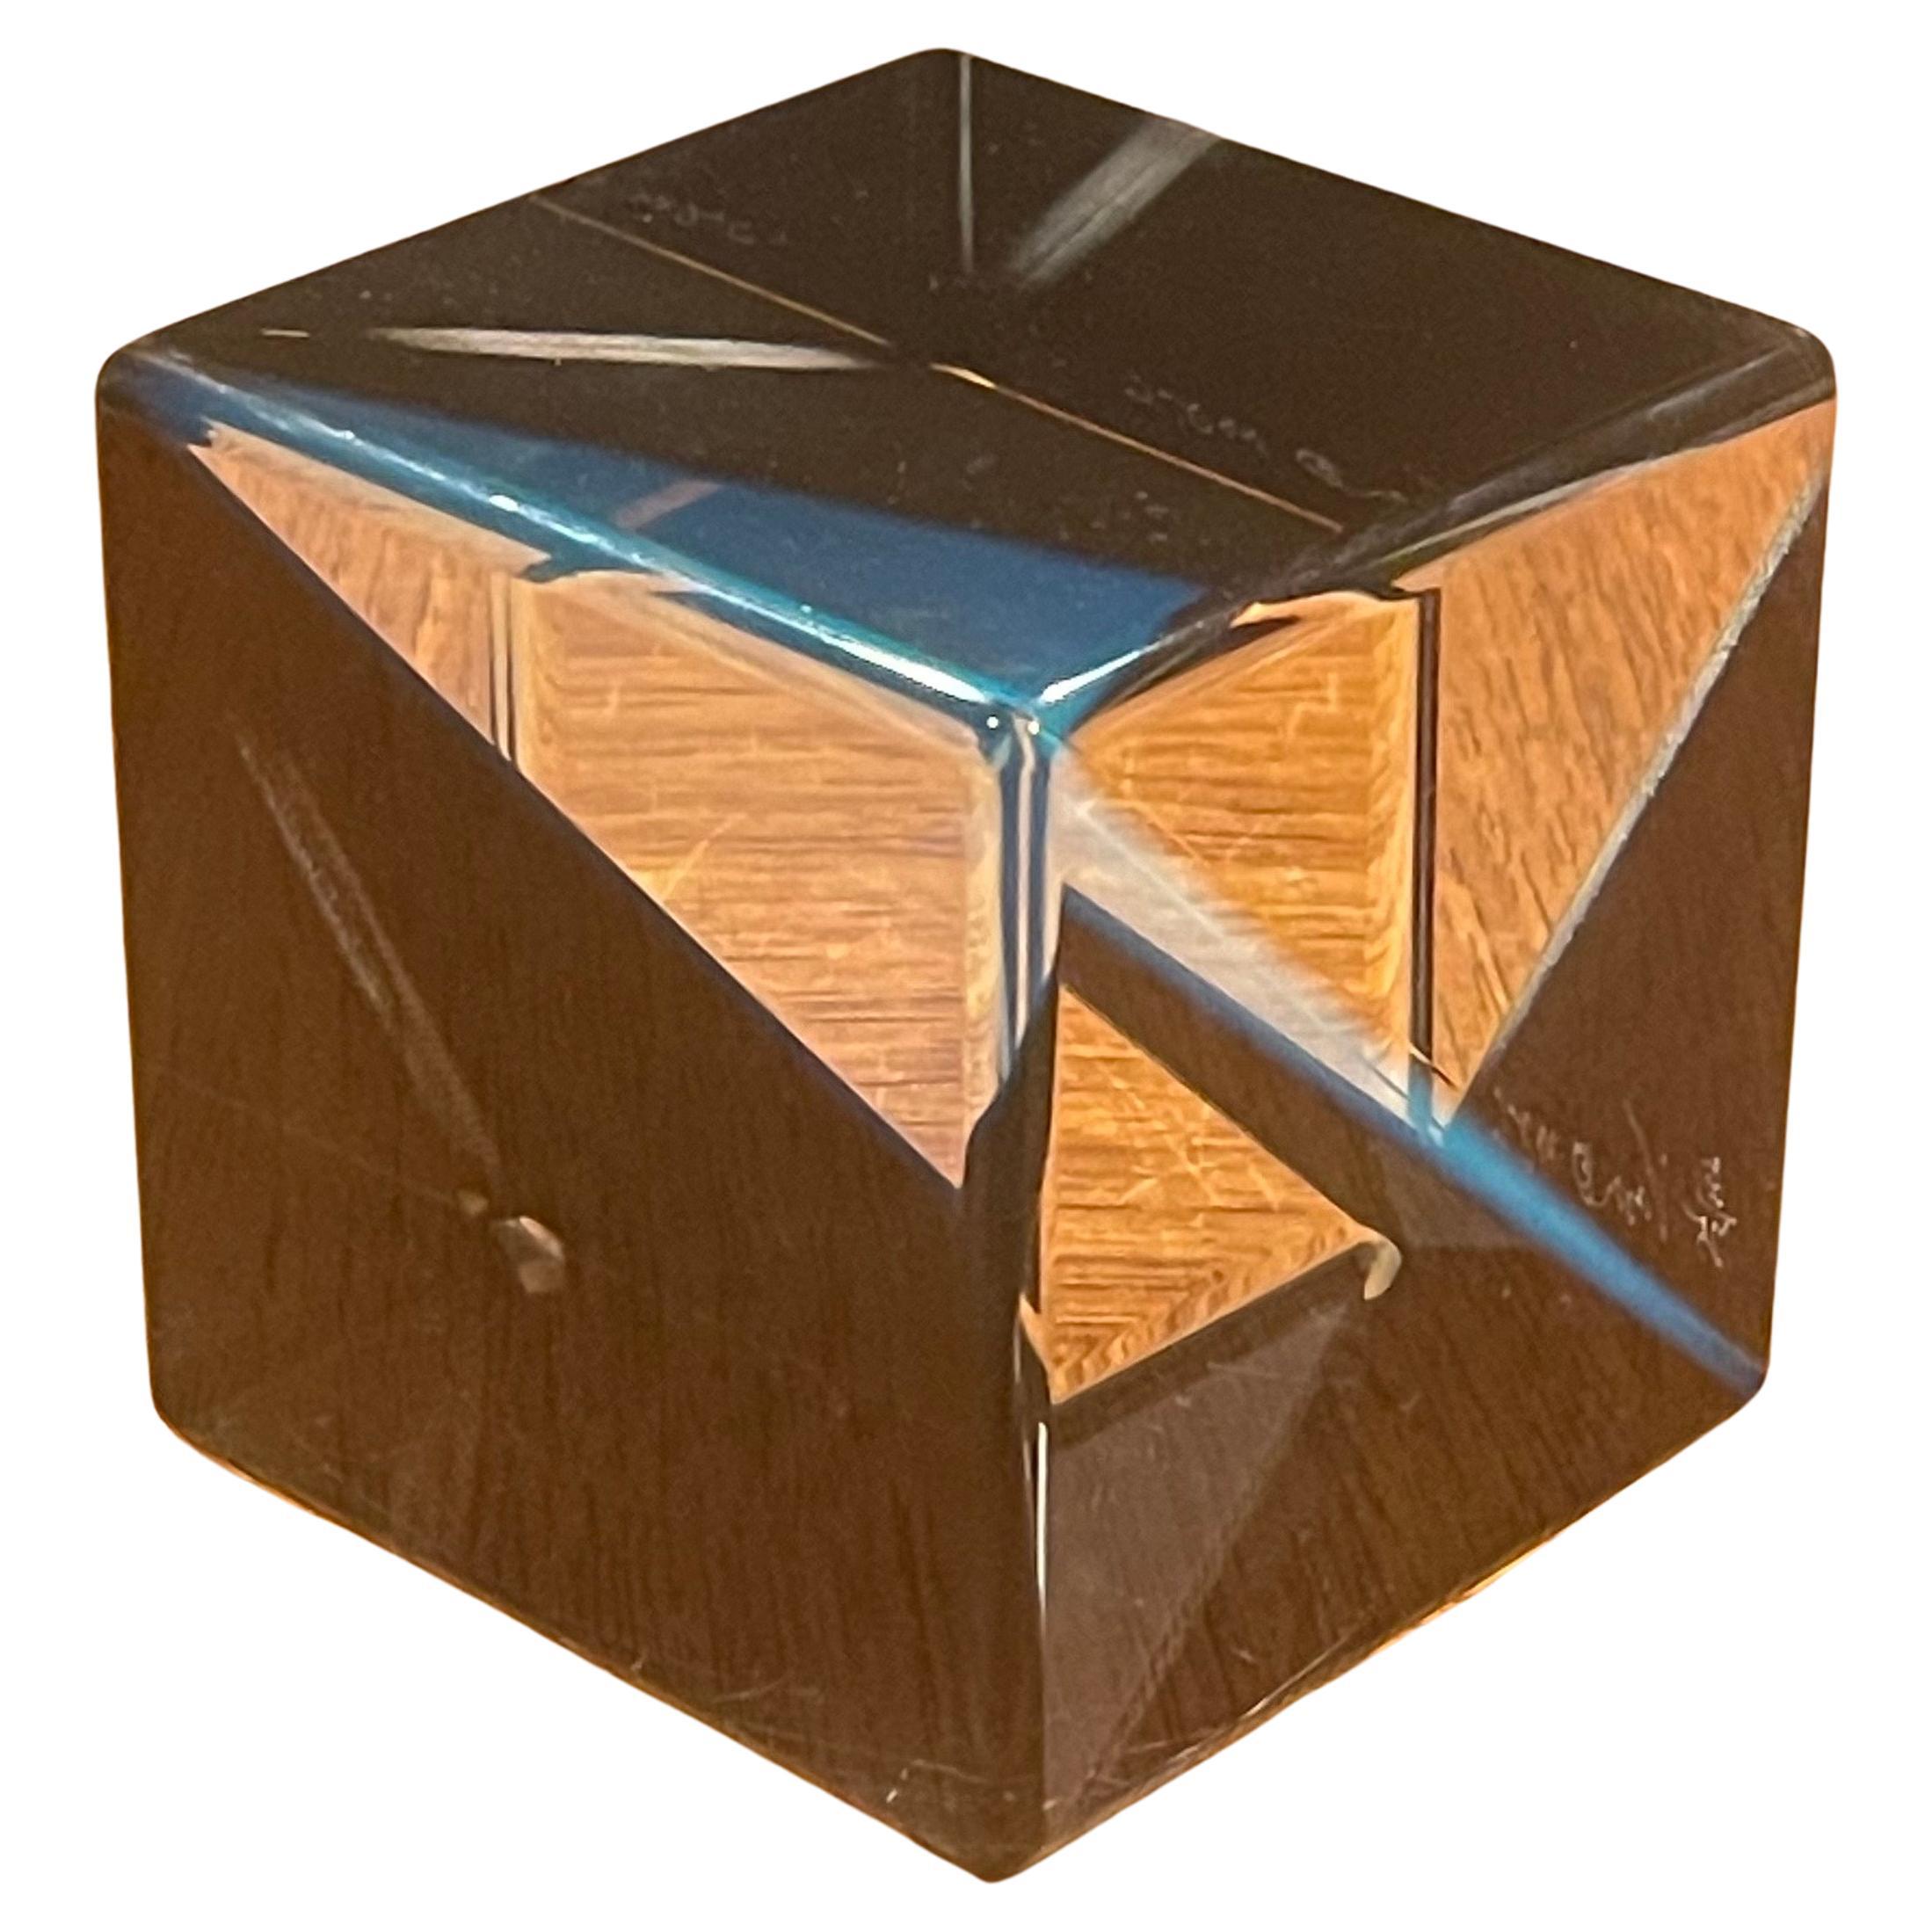 Op Art acrylic cube sculpture by Vasa Mihich, circa 1986. The optical look is changed by rotating the piece and letting the light refract at different angles; there are literally hundreds of different looks that can be created. The Minimalist piece